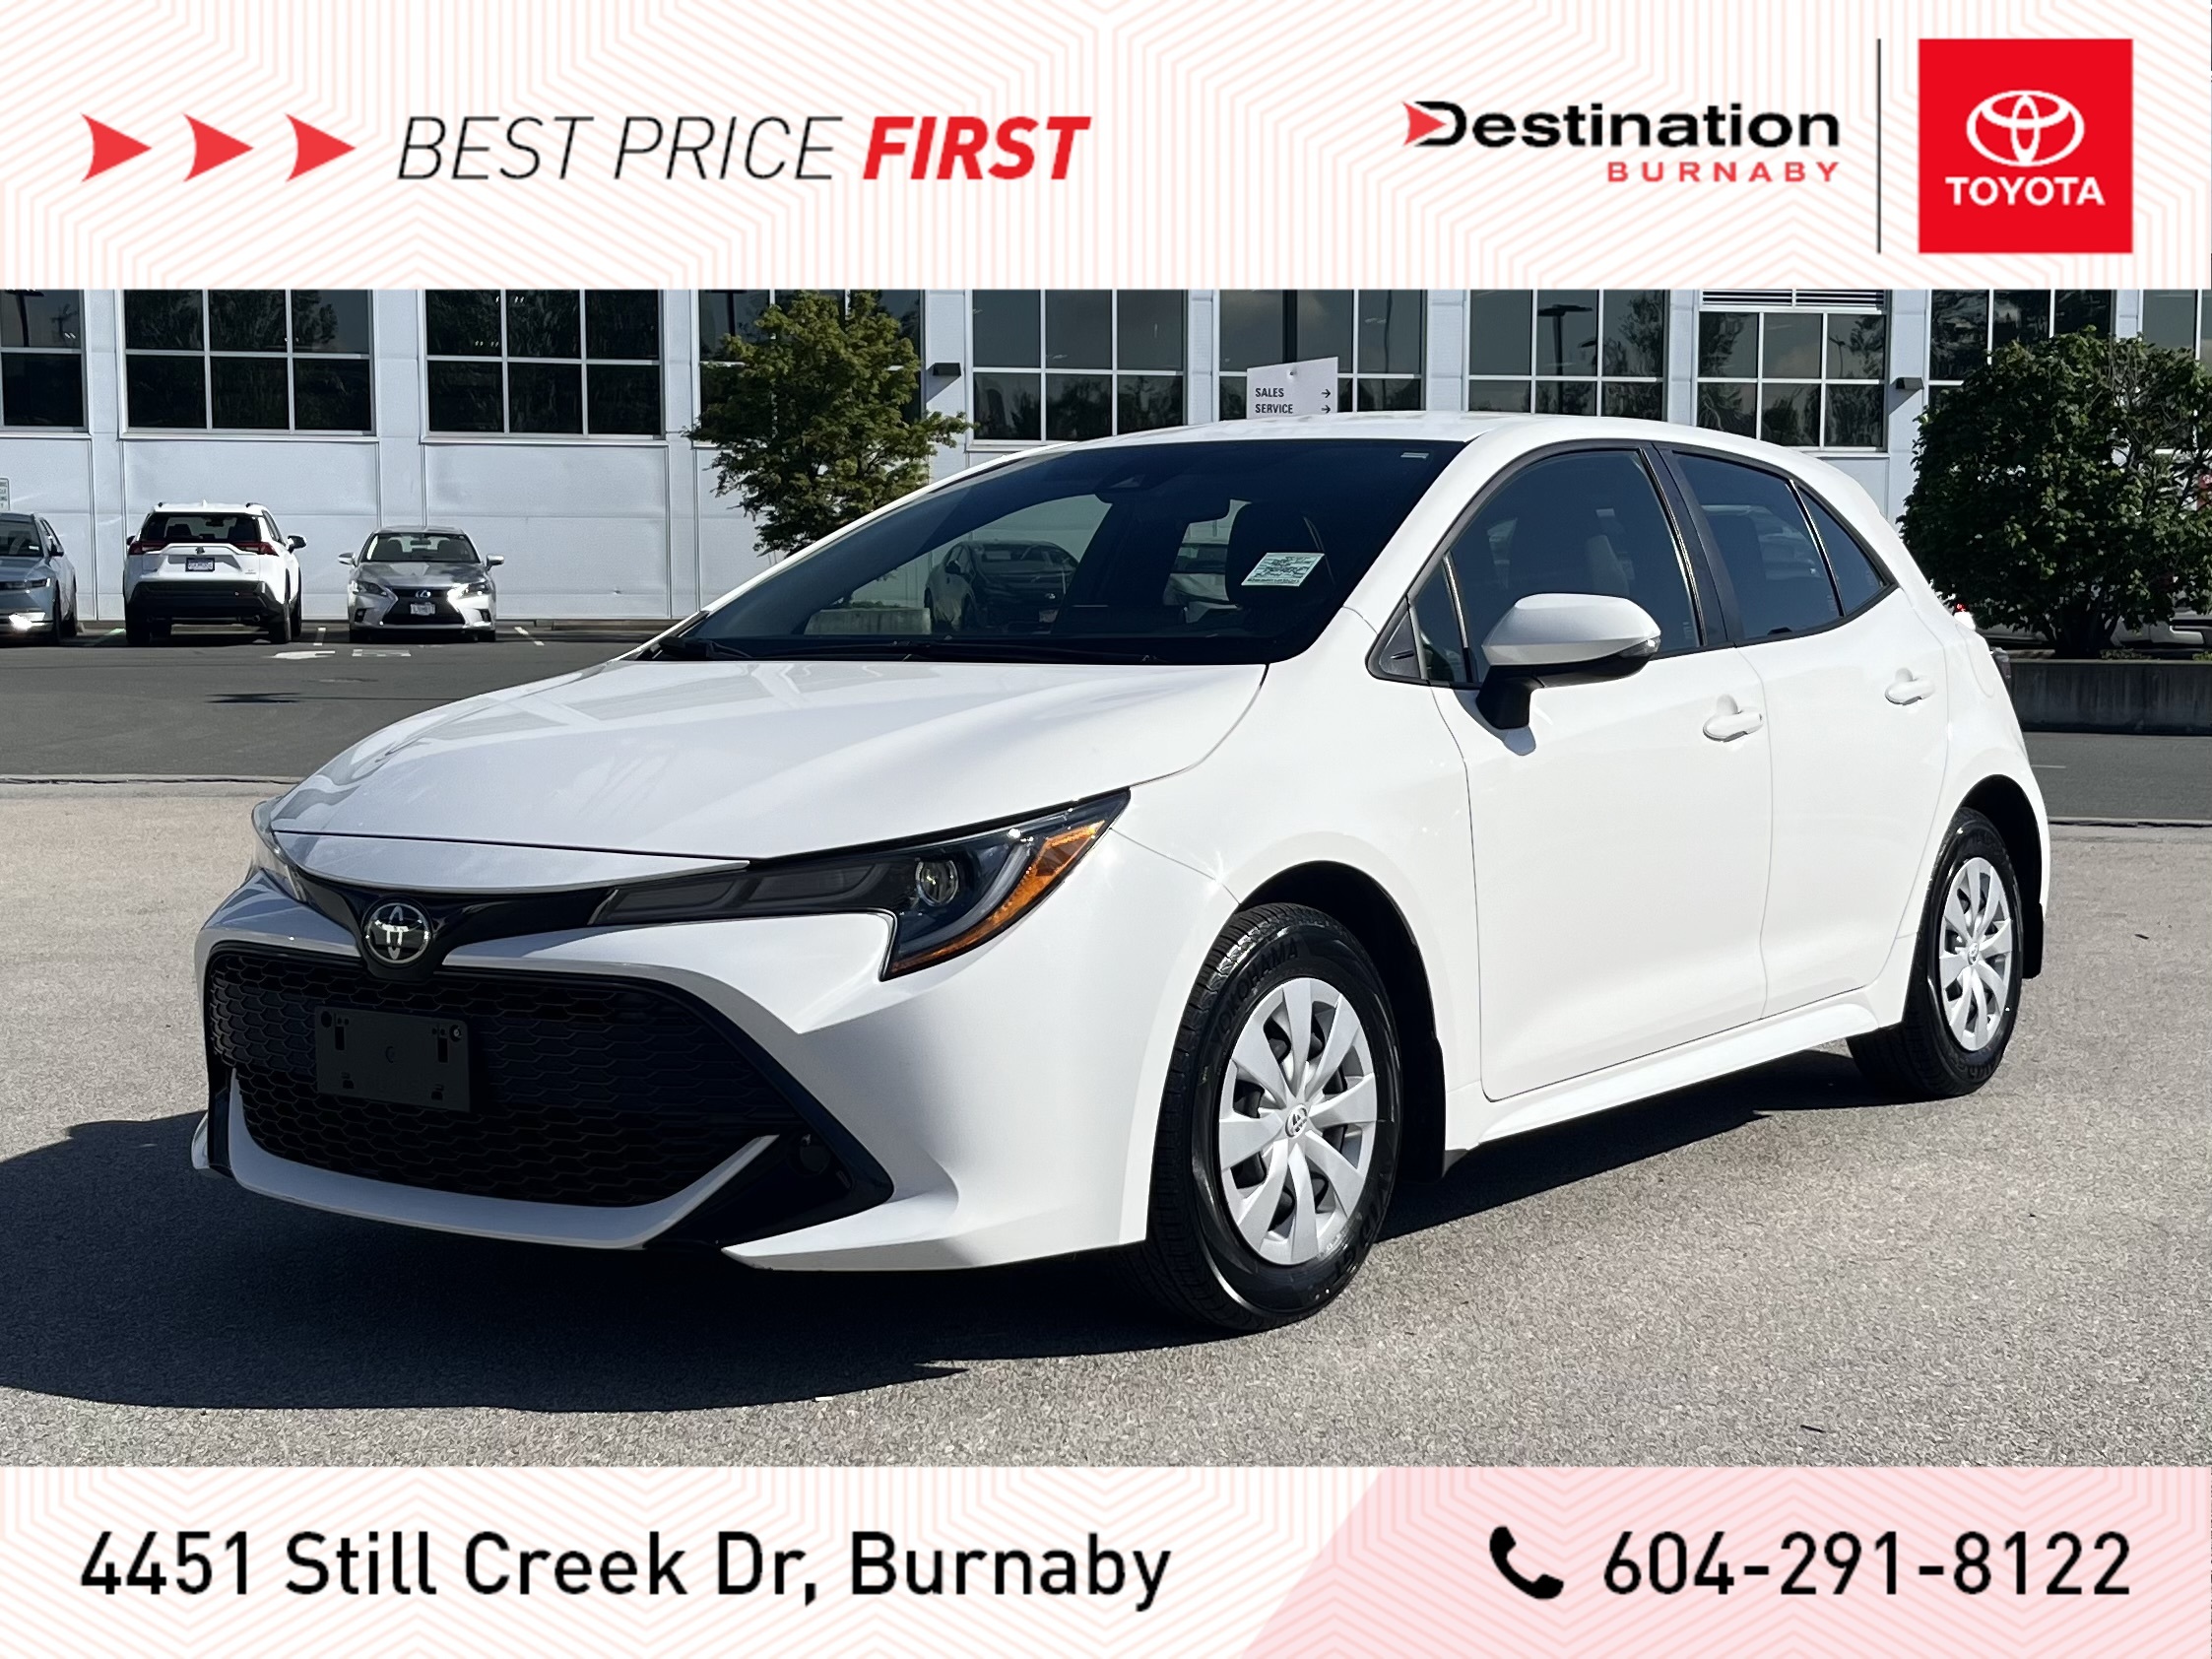 2019 Toyota Corolla Hatchback 6-speed, Low Kms, No accidents